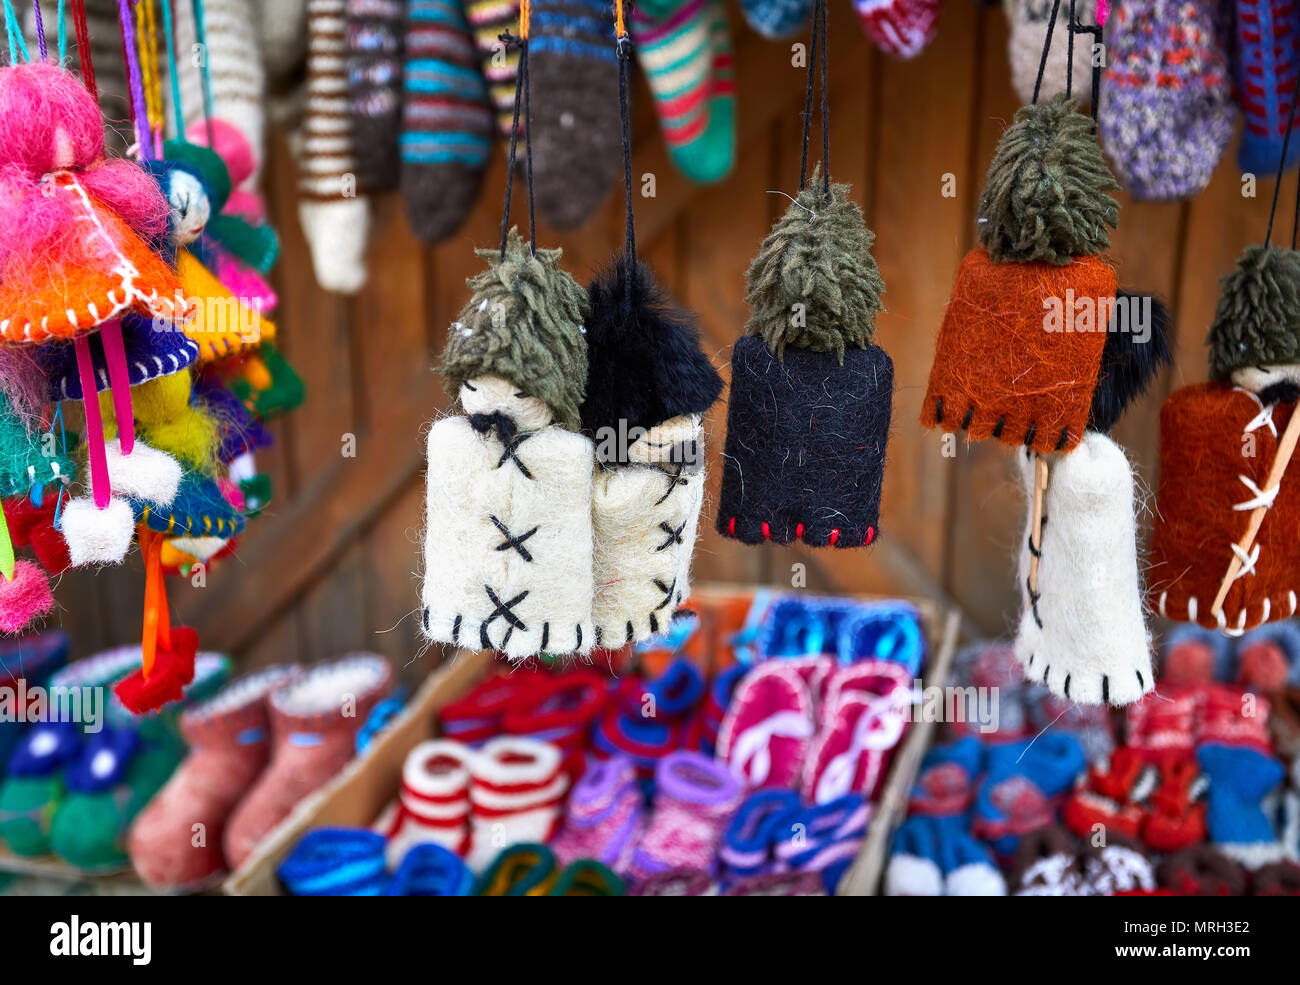 Traditional toys and figures at market in Tbilisi, Georgia Stock Photo